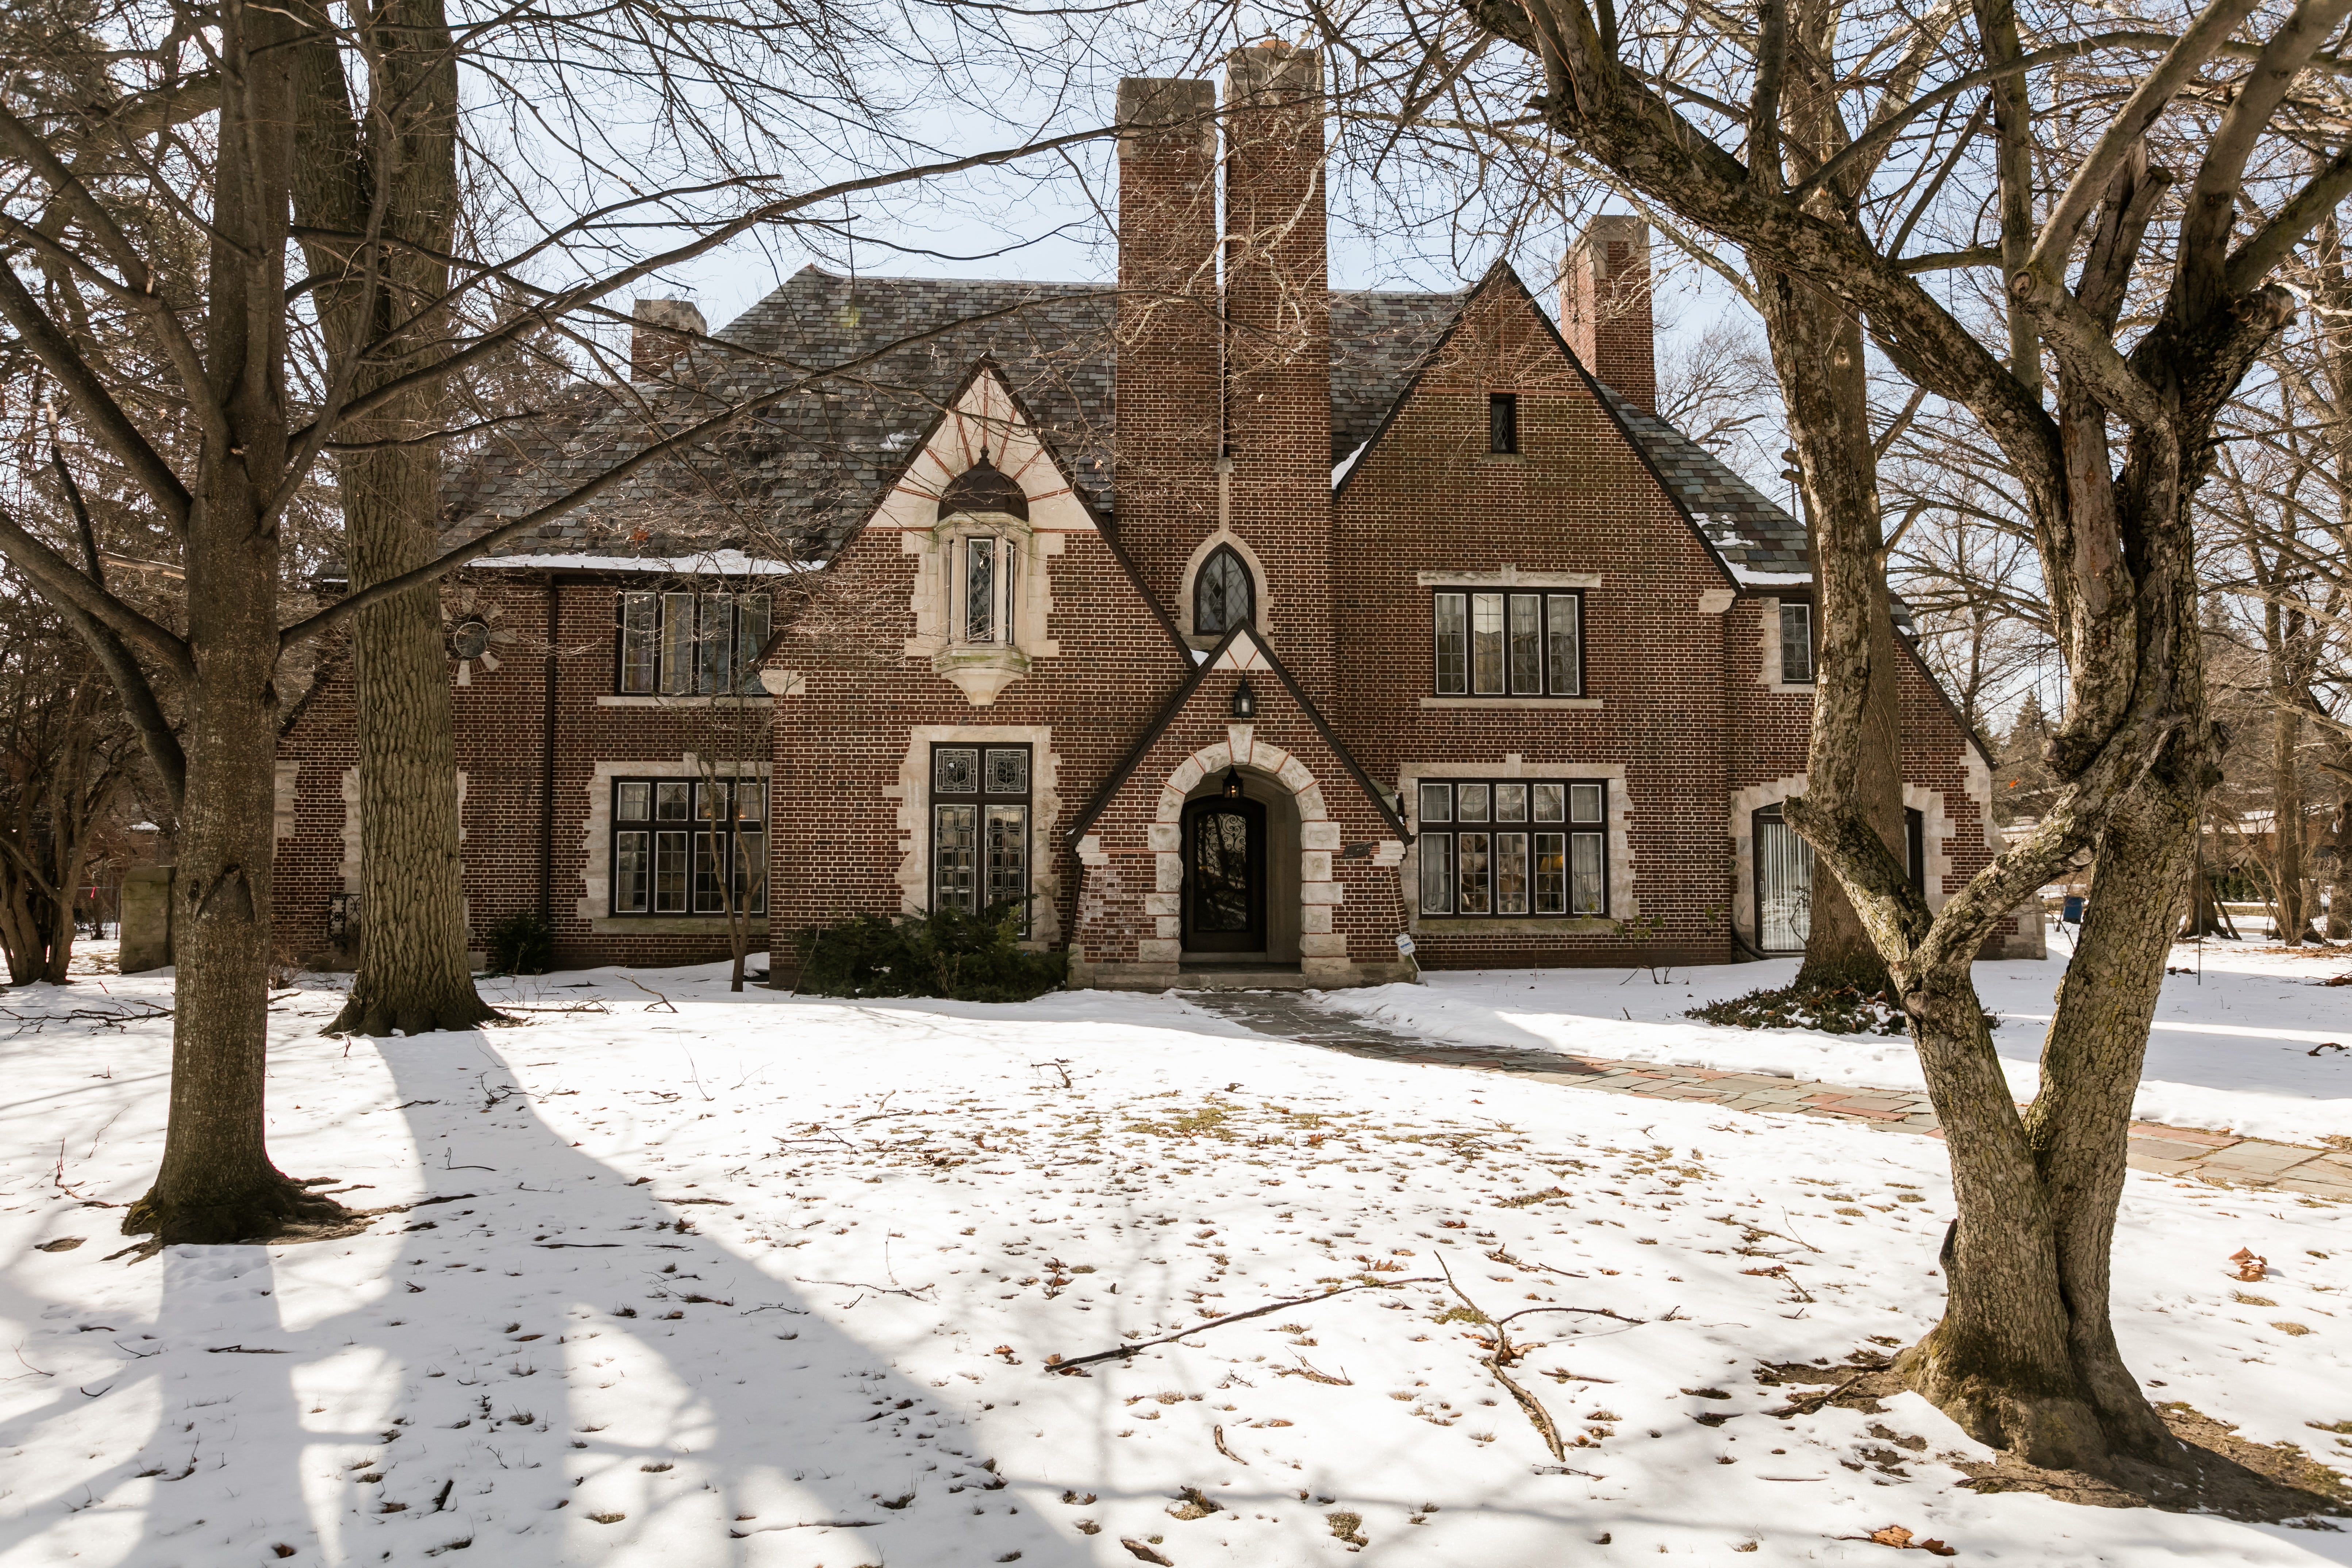 With its unique craftsmanship and architectural design, realtor Treder added, "The home/estate captures the 'American Estate Living' of years gone by, including a rare carriage house."